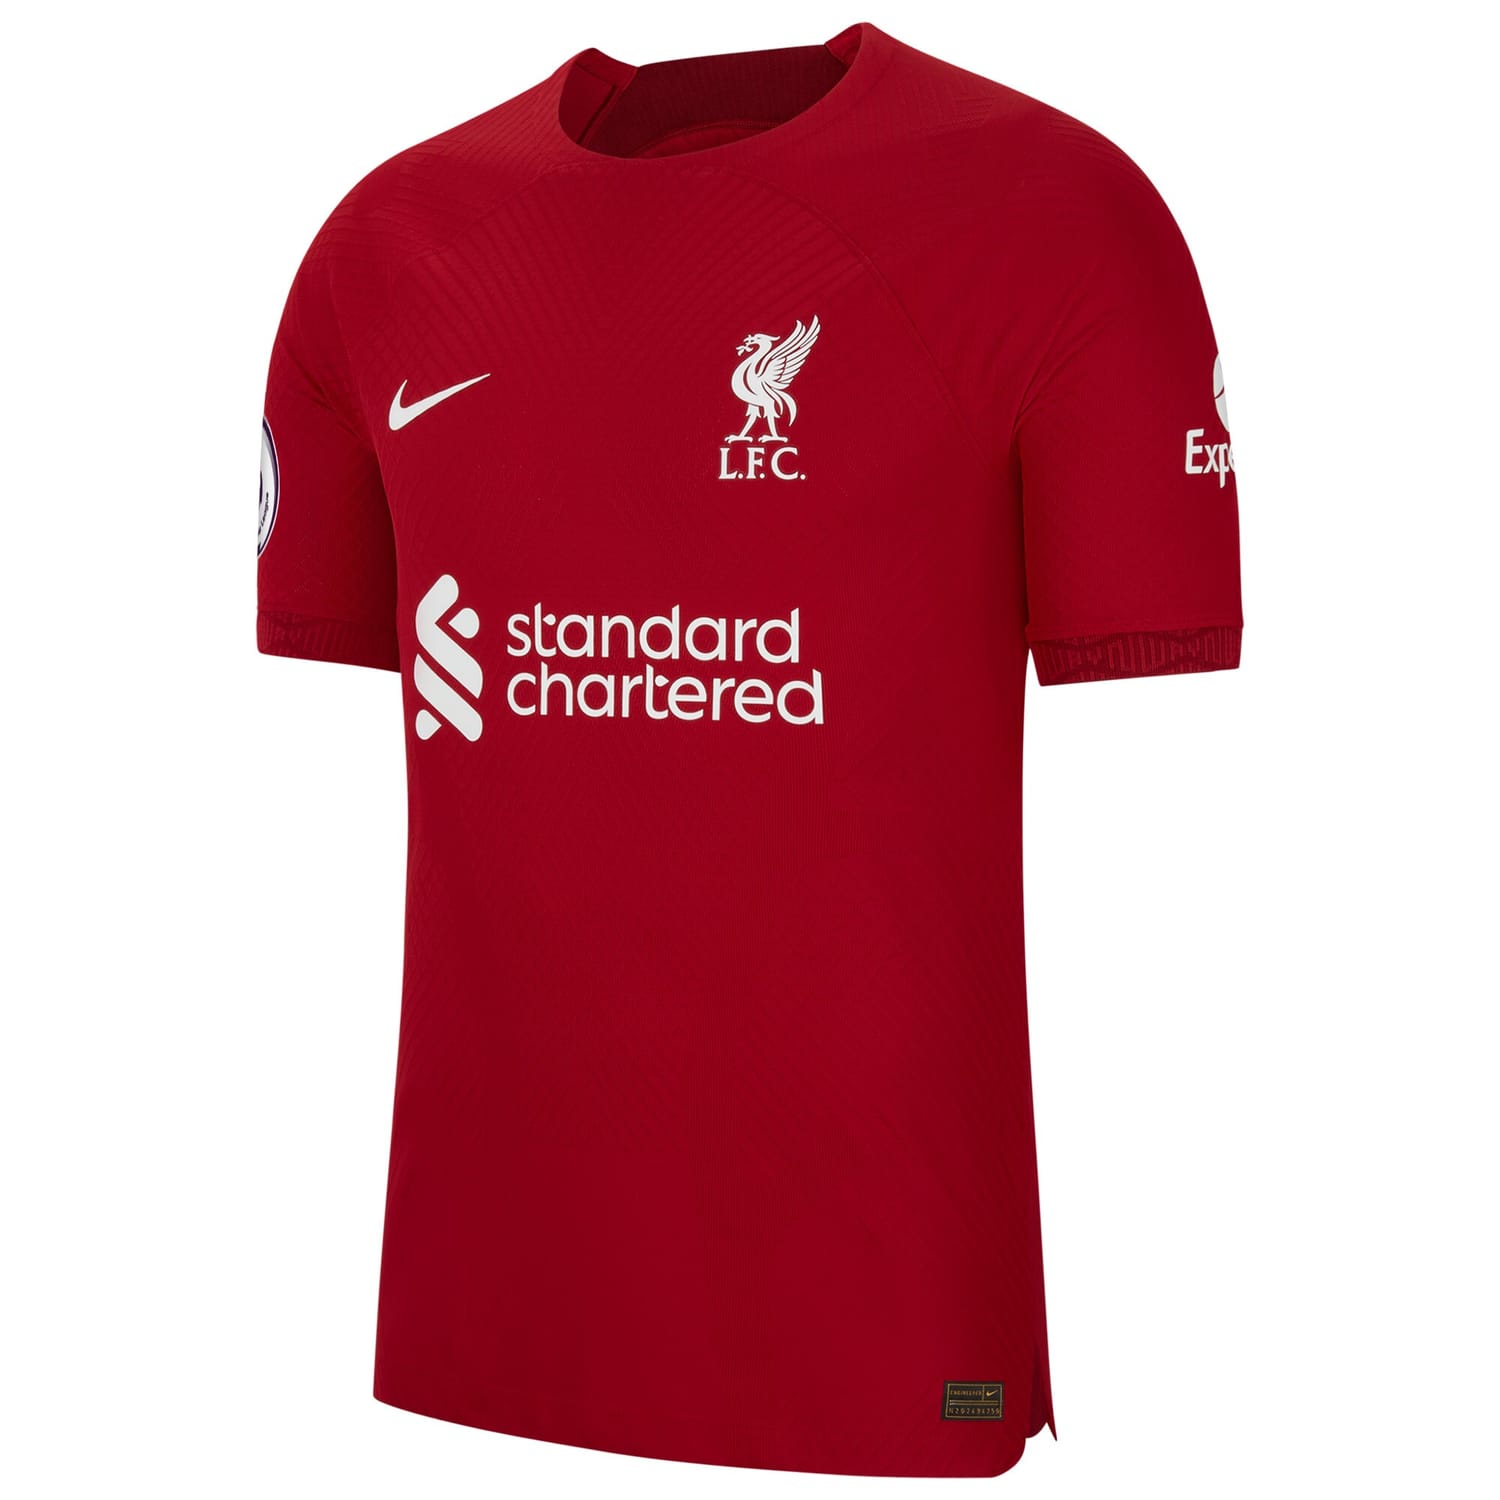 Premier League Liverpool Home Authentic Jersey Shirt Red 2022-23 player Luis Diaz printing for Men